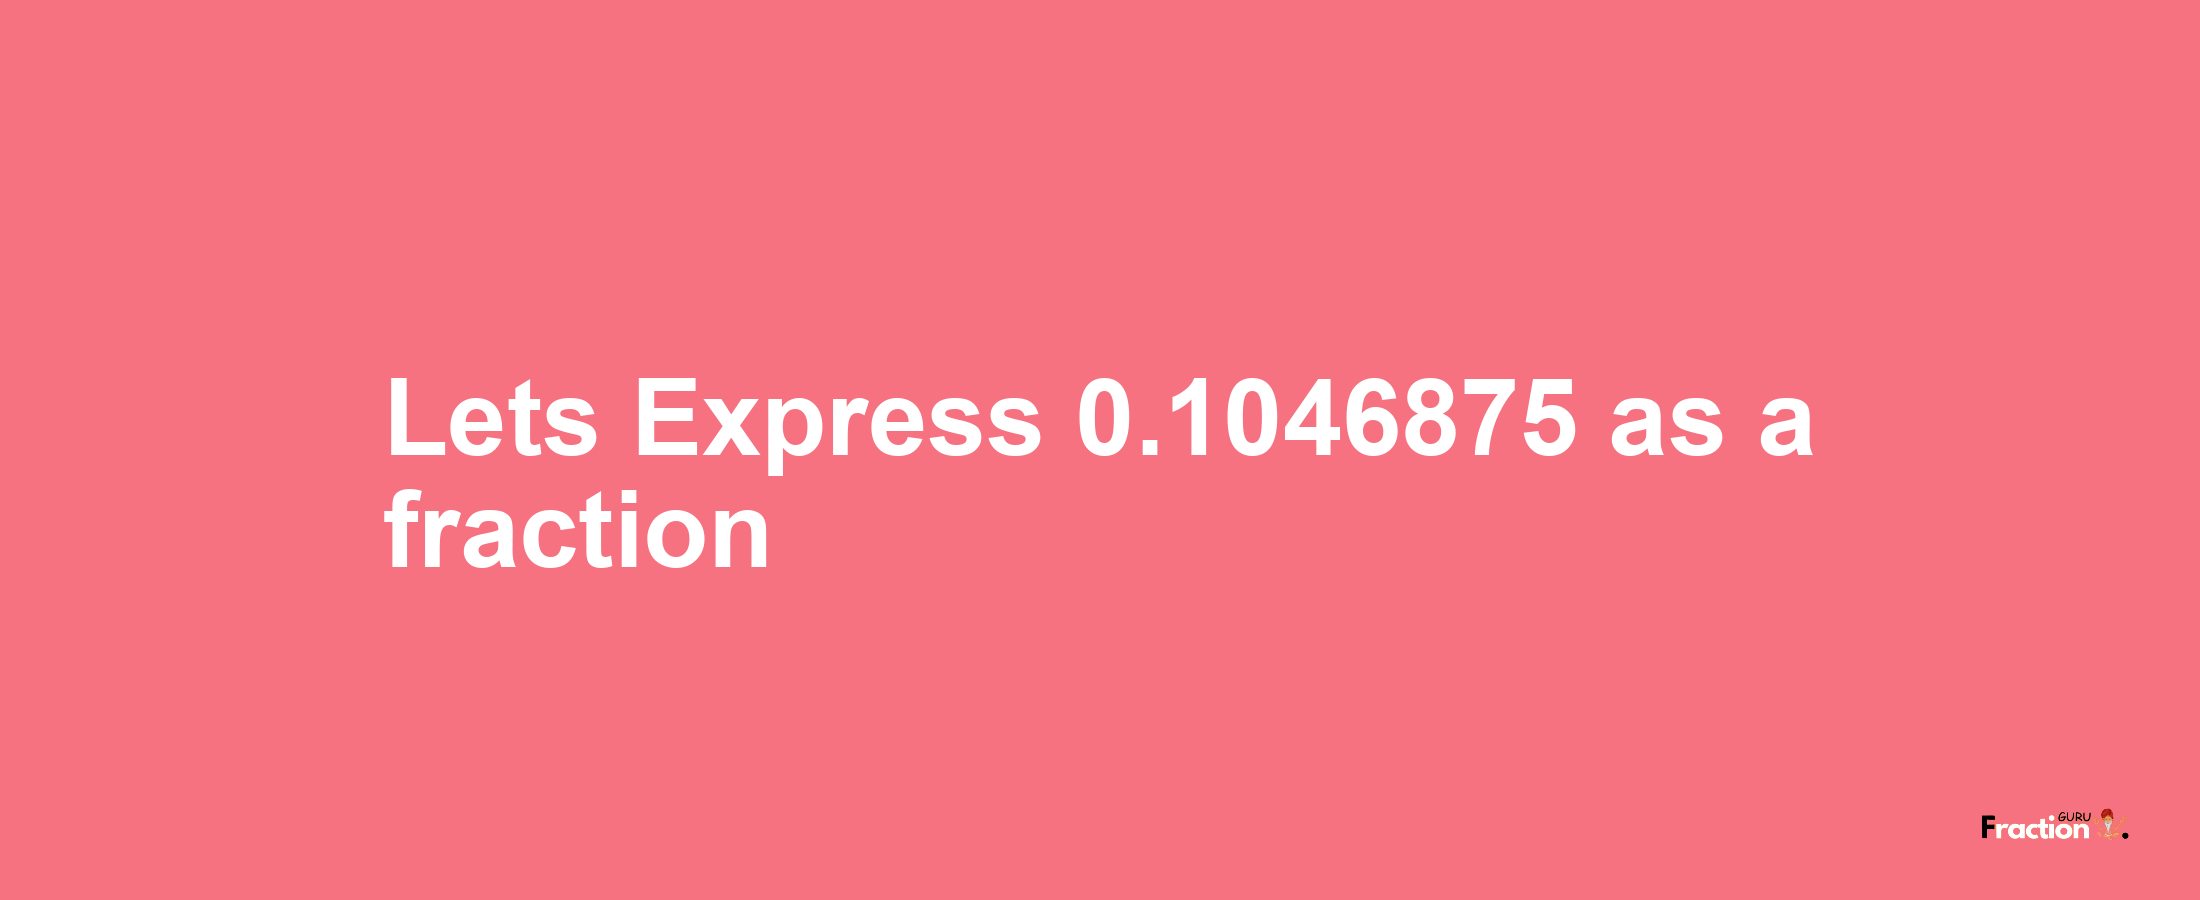 Lets Express 0.1046875 as afraction